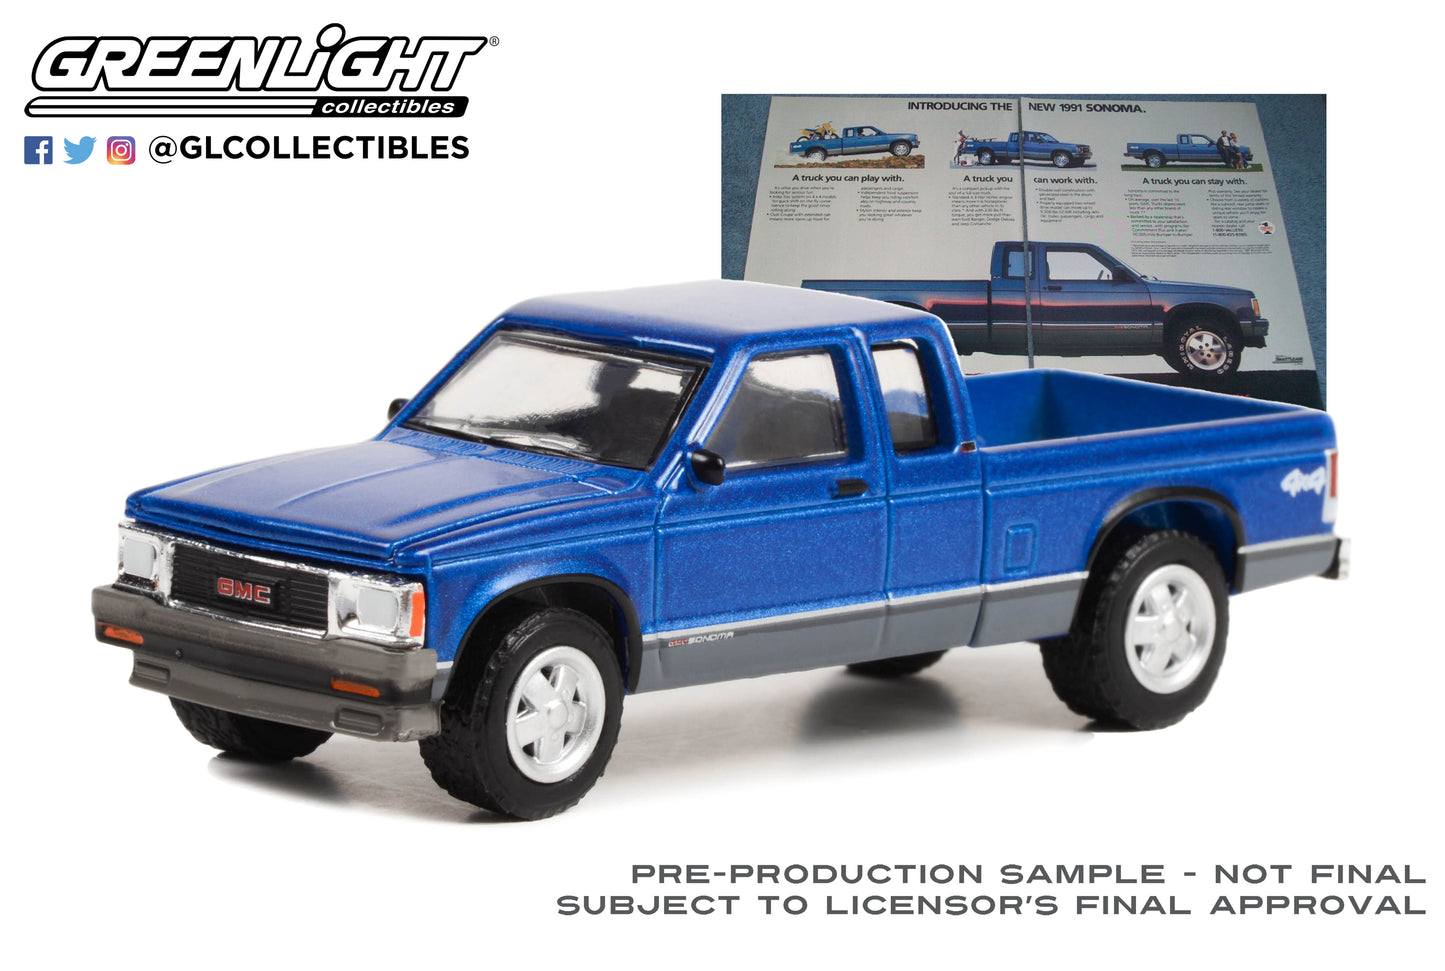 GreenLight 1:64 Vintage Ad Cars Series 8 - 1991 GMC Sonoma “It’s Not Just A Truck Anymore” 39110-F